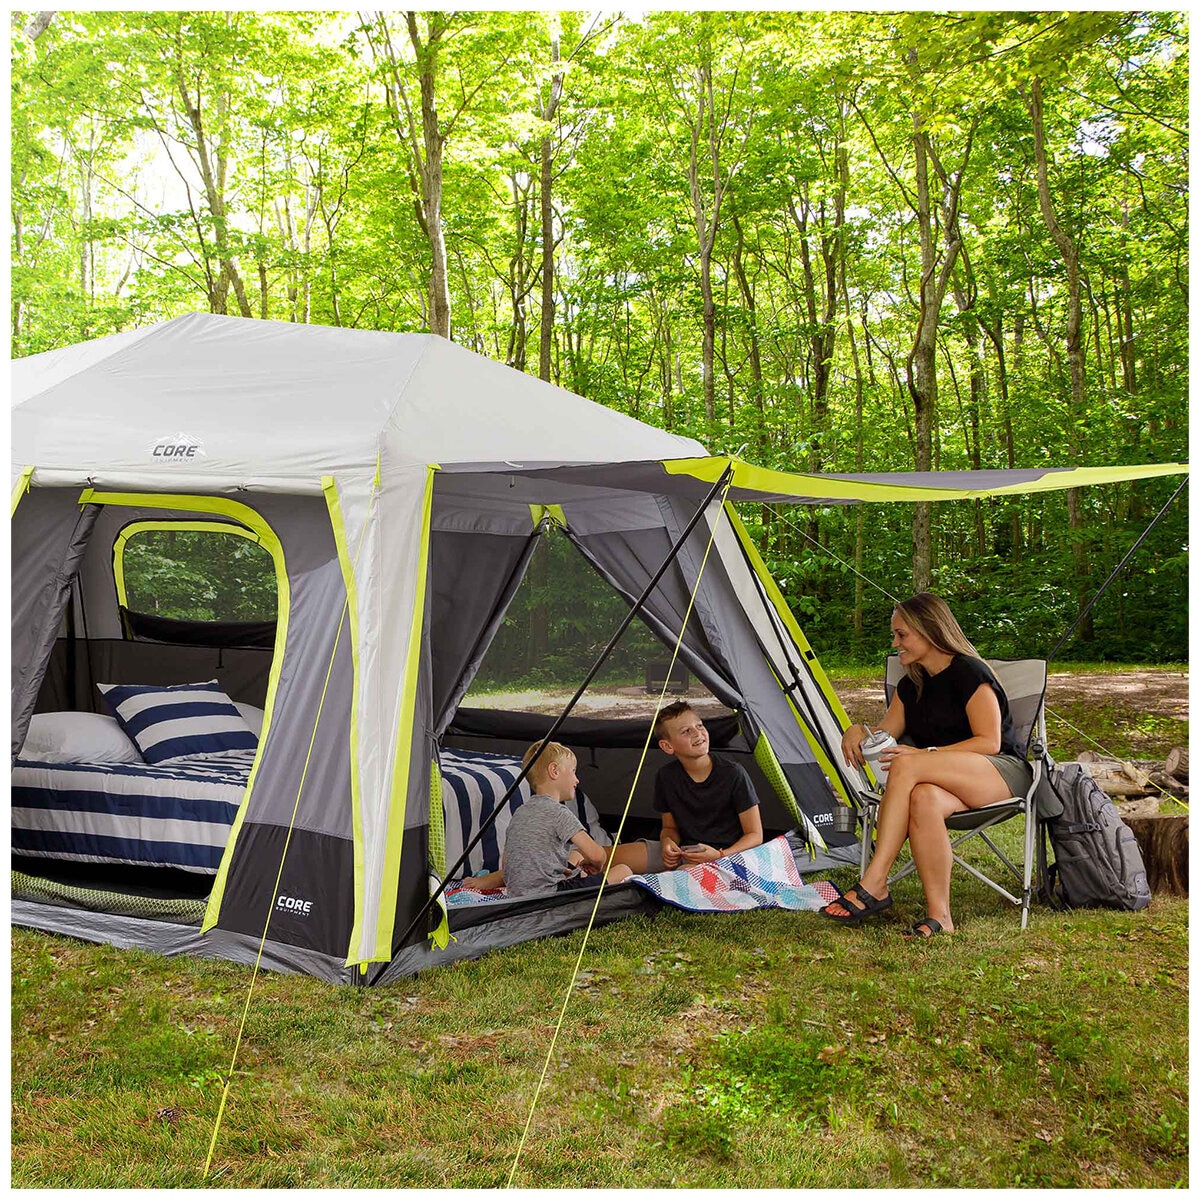  Equipment 10 Person Lighted Instant Cabin Tent with Awning :  Sports & Outdoors